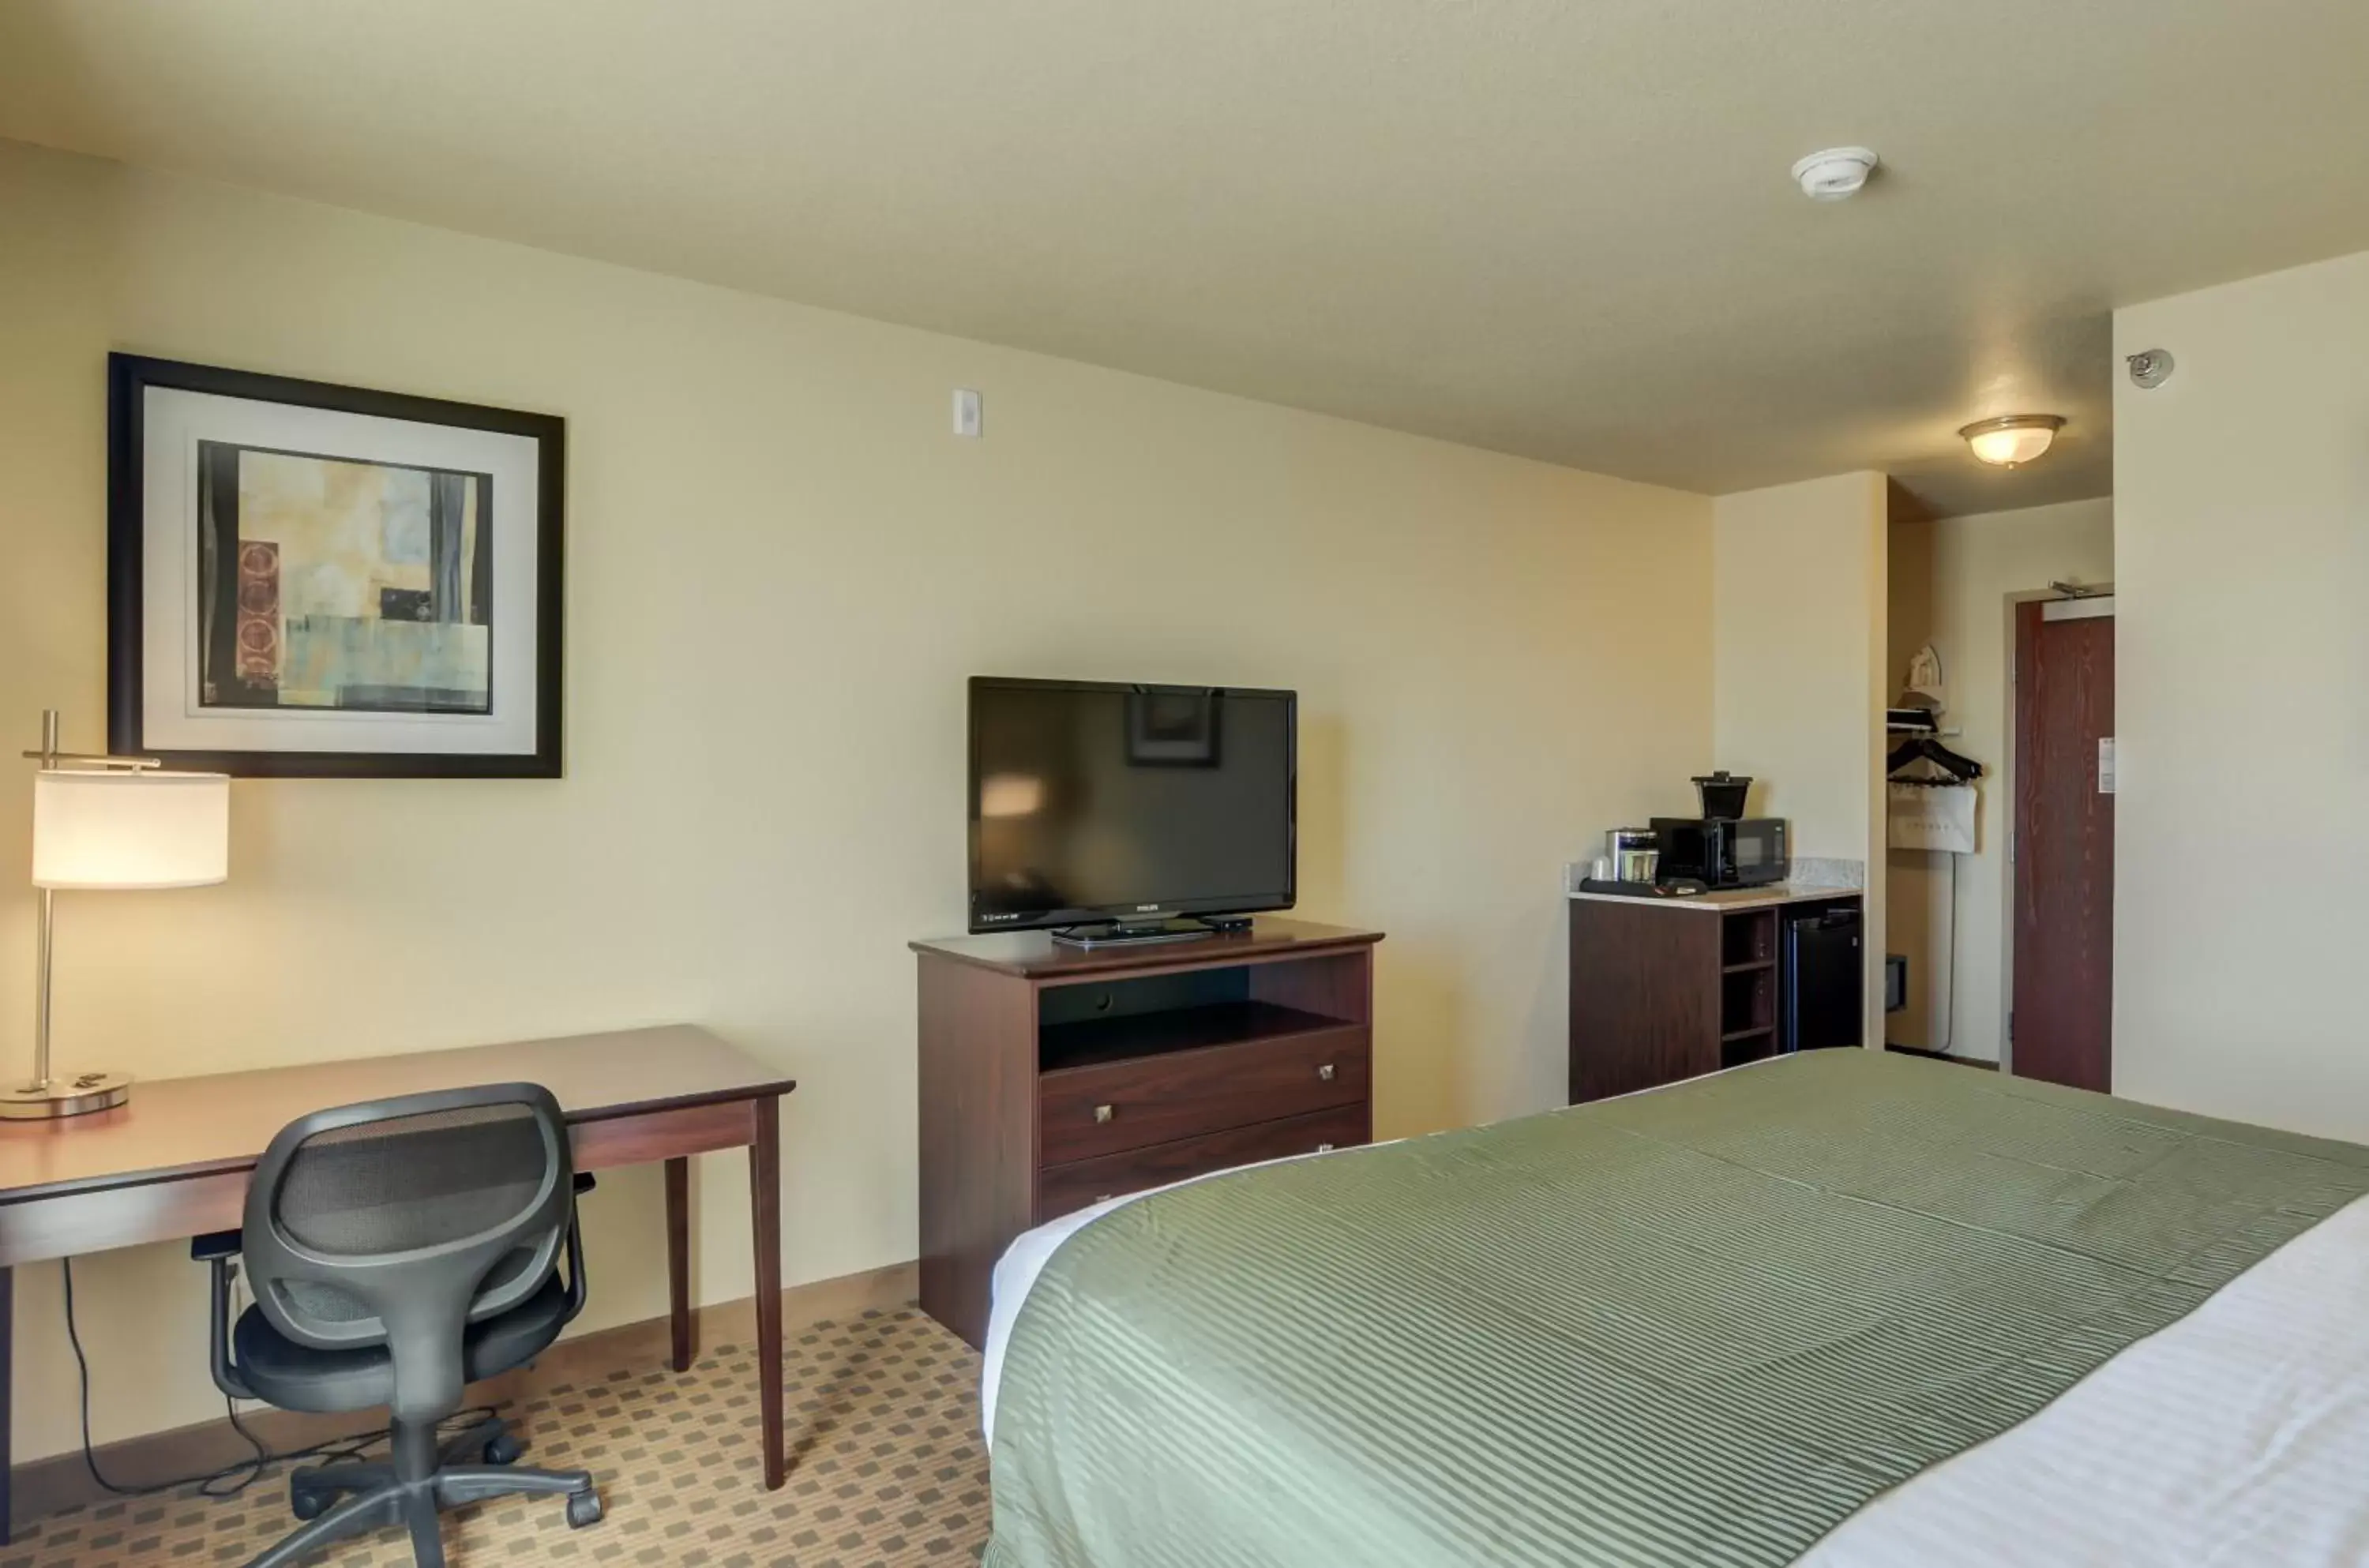 Bed, Room Photo in Cobblestone Inn & Suites - Ord